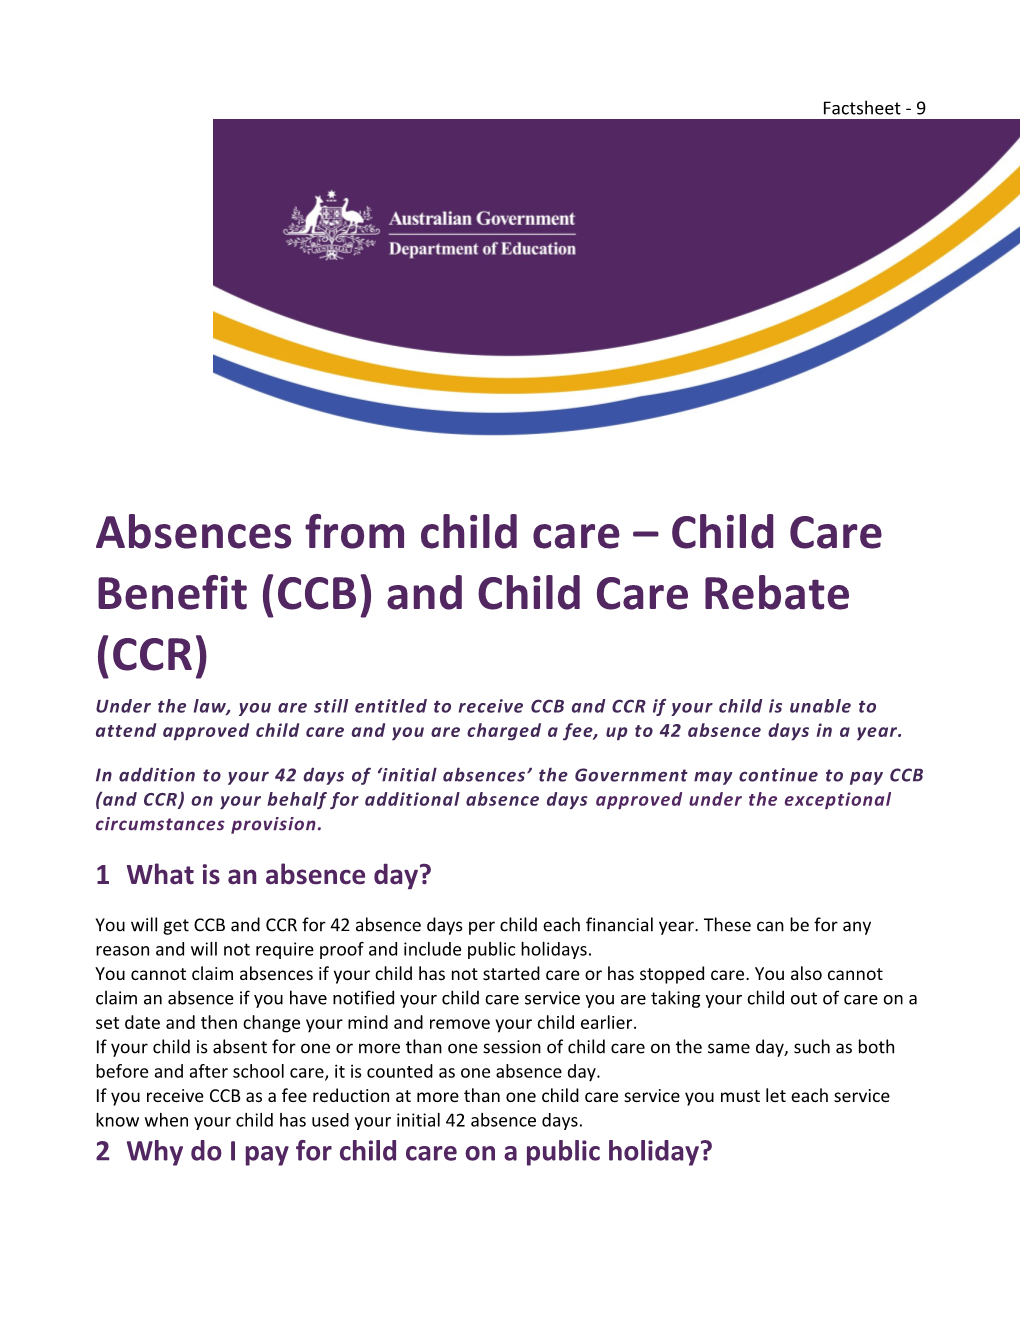 Absences from Child Care Child Care Benefit (CCB) and Child Care Rebate (CCR)